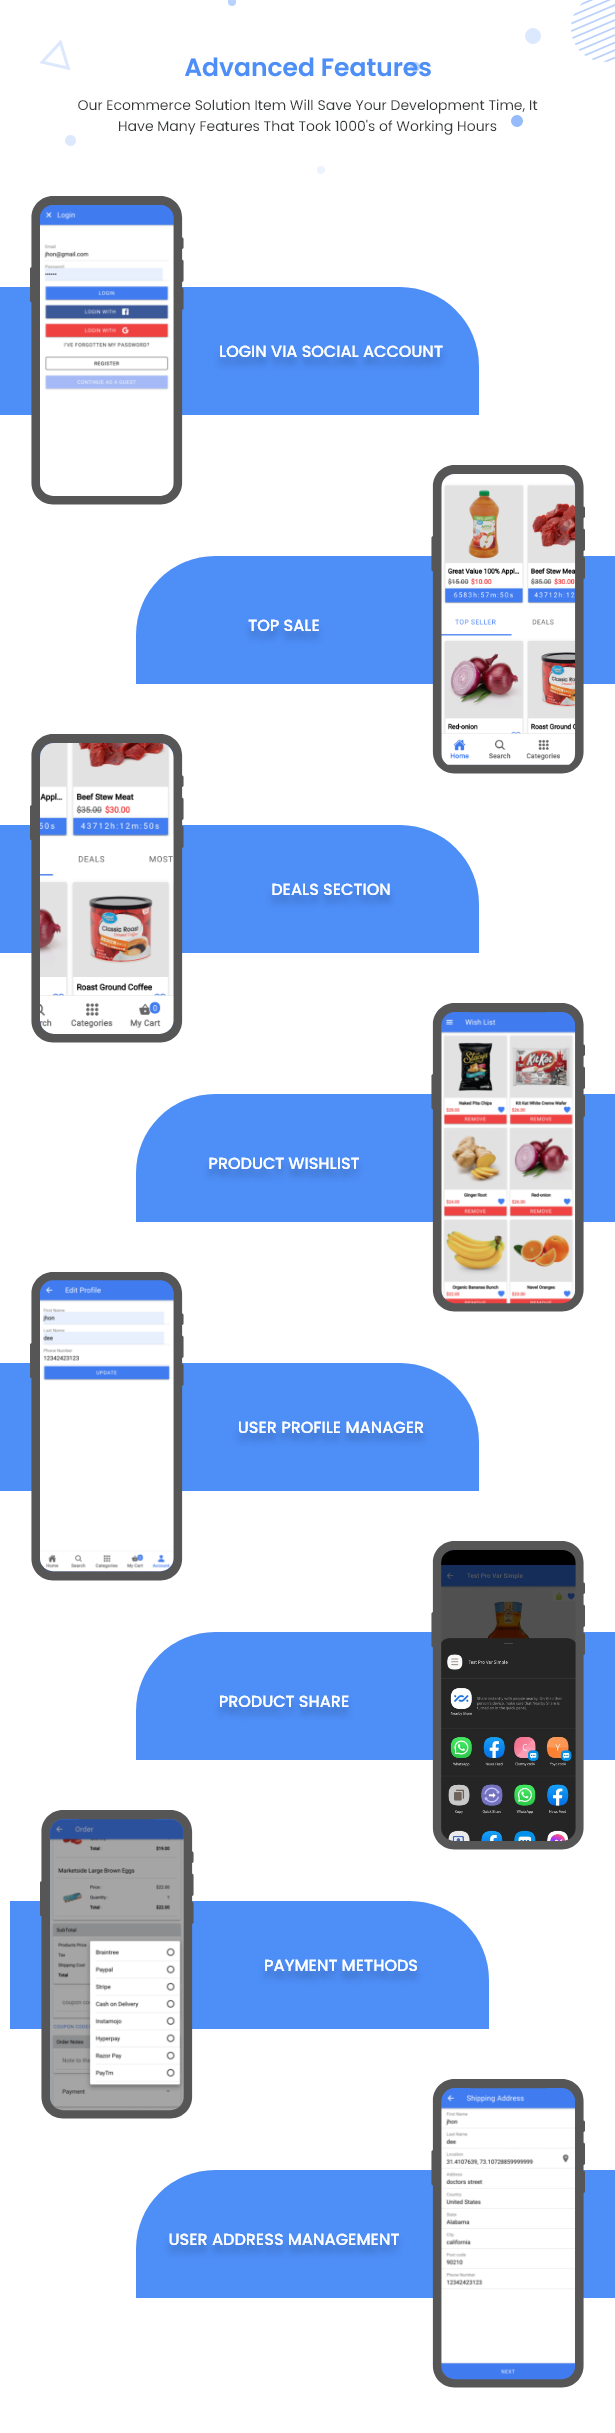 Best Ecommerce Solution with Delivery App For Grocery, Food, Pharmacy, Any Stores / Laravel + IONIC5 - 42